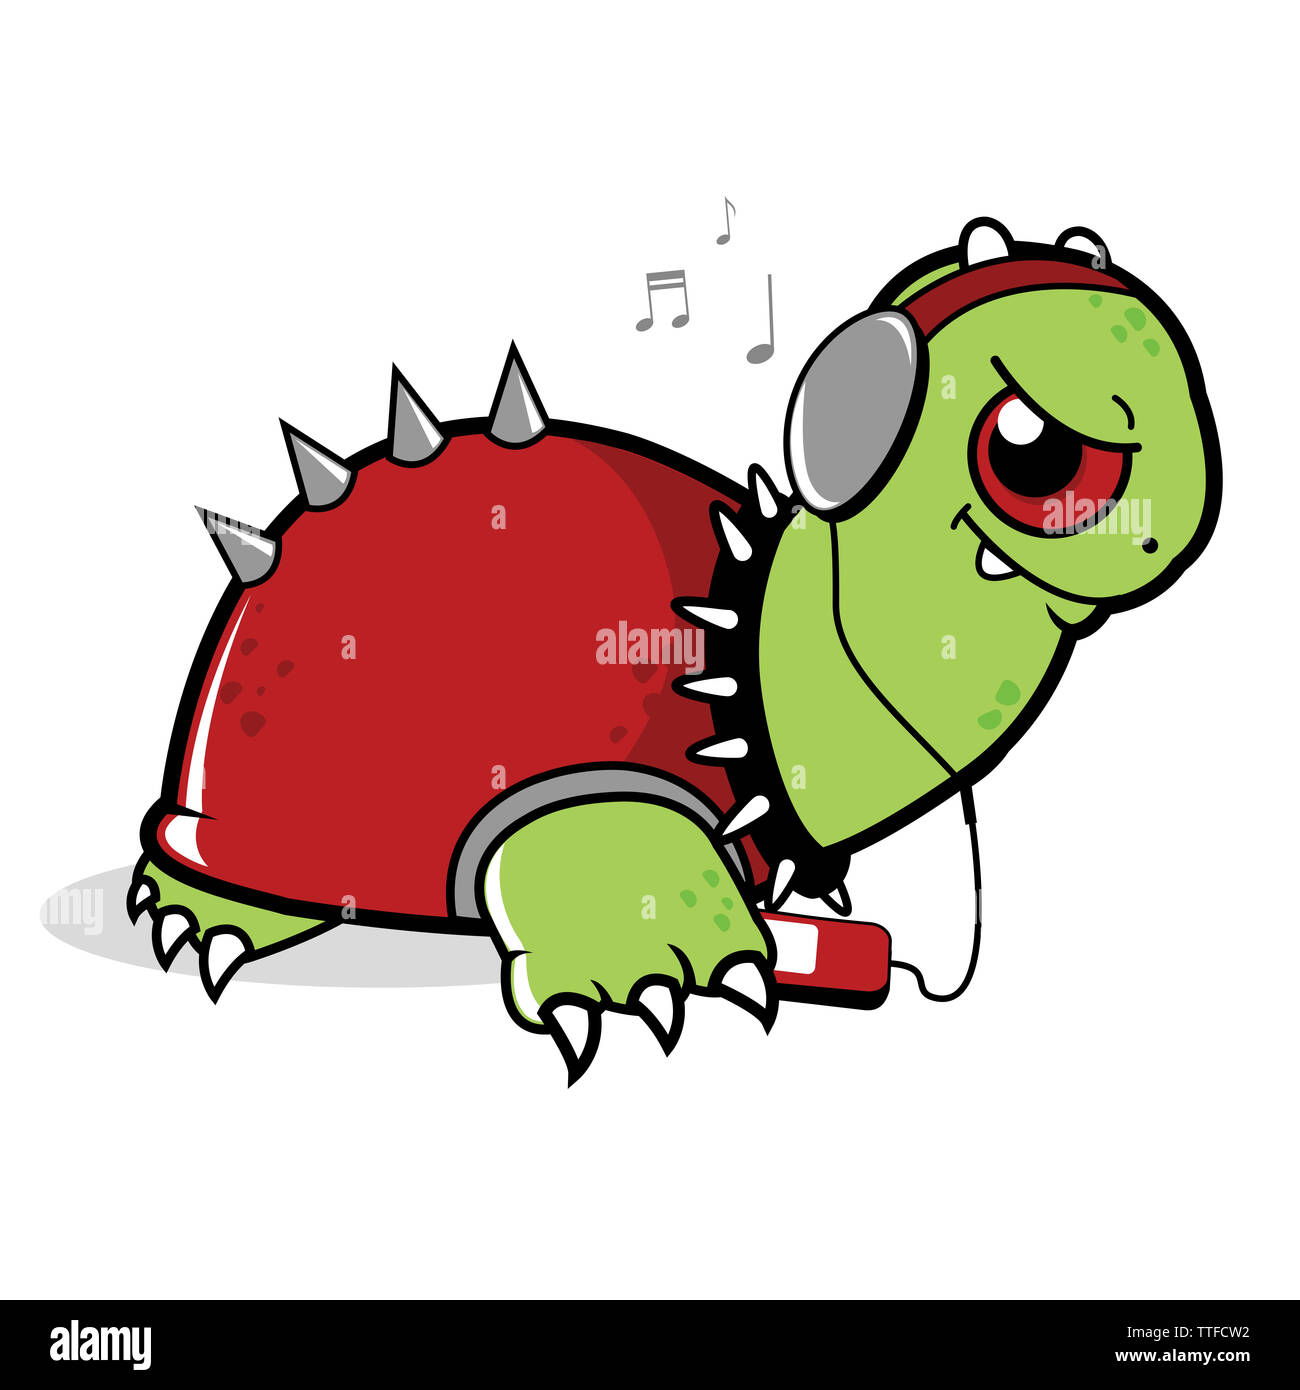 Illustration of a turtle listening to music with headphones. Stock Photo